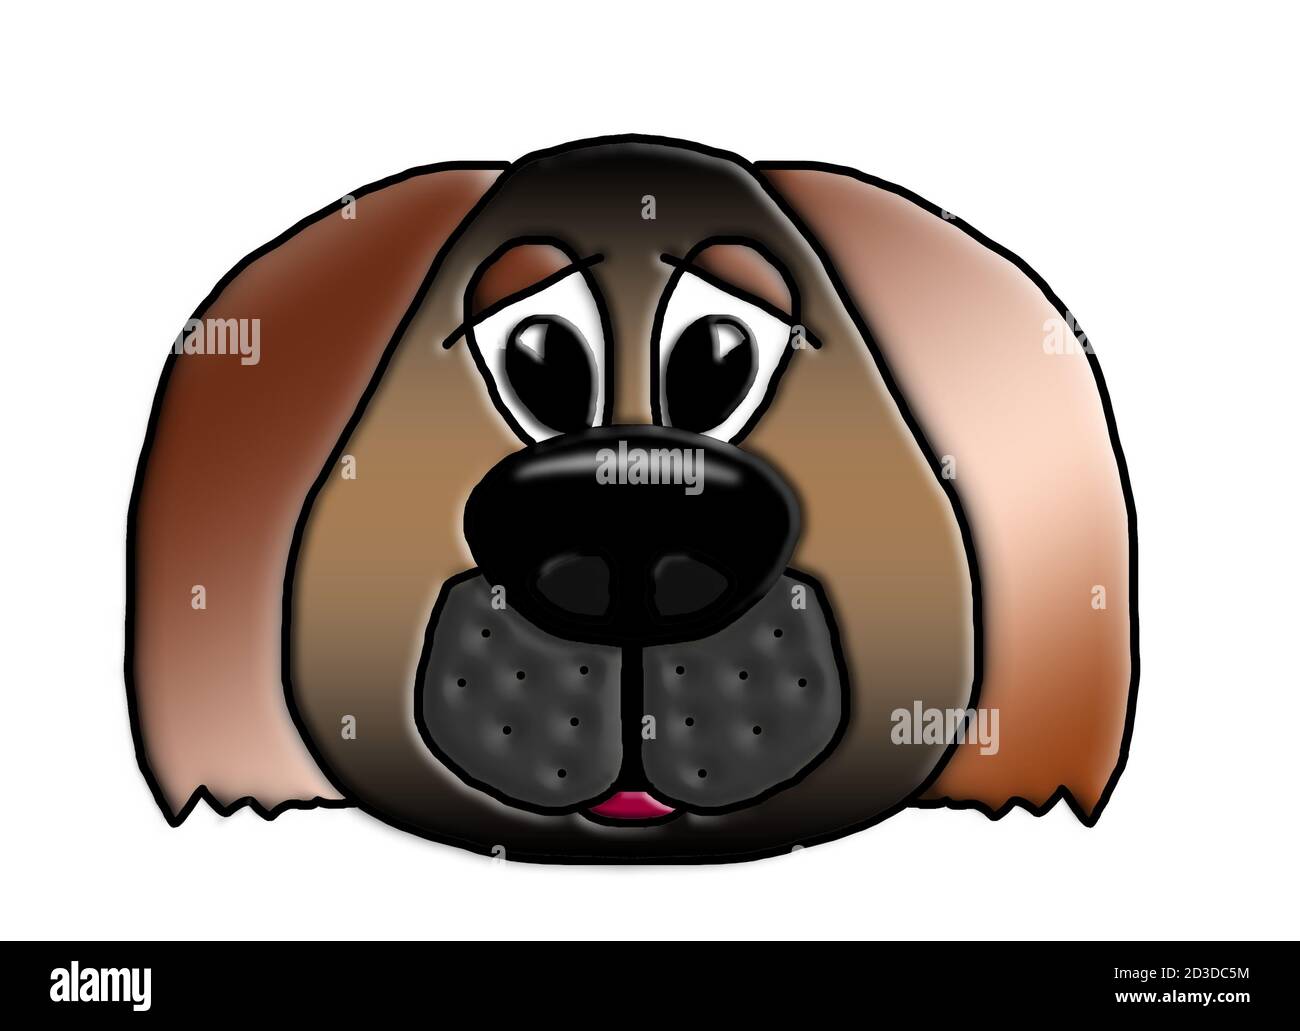 Dog face digital image with plain background cartoon style artwork textured  and highlighted facial features. Large shiny nose floppy ears sleepy eyes  Stock Photo - Alamy